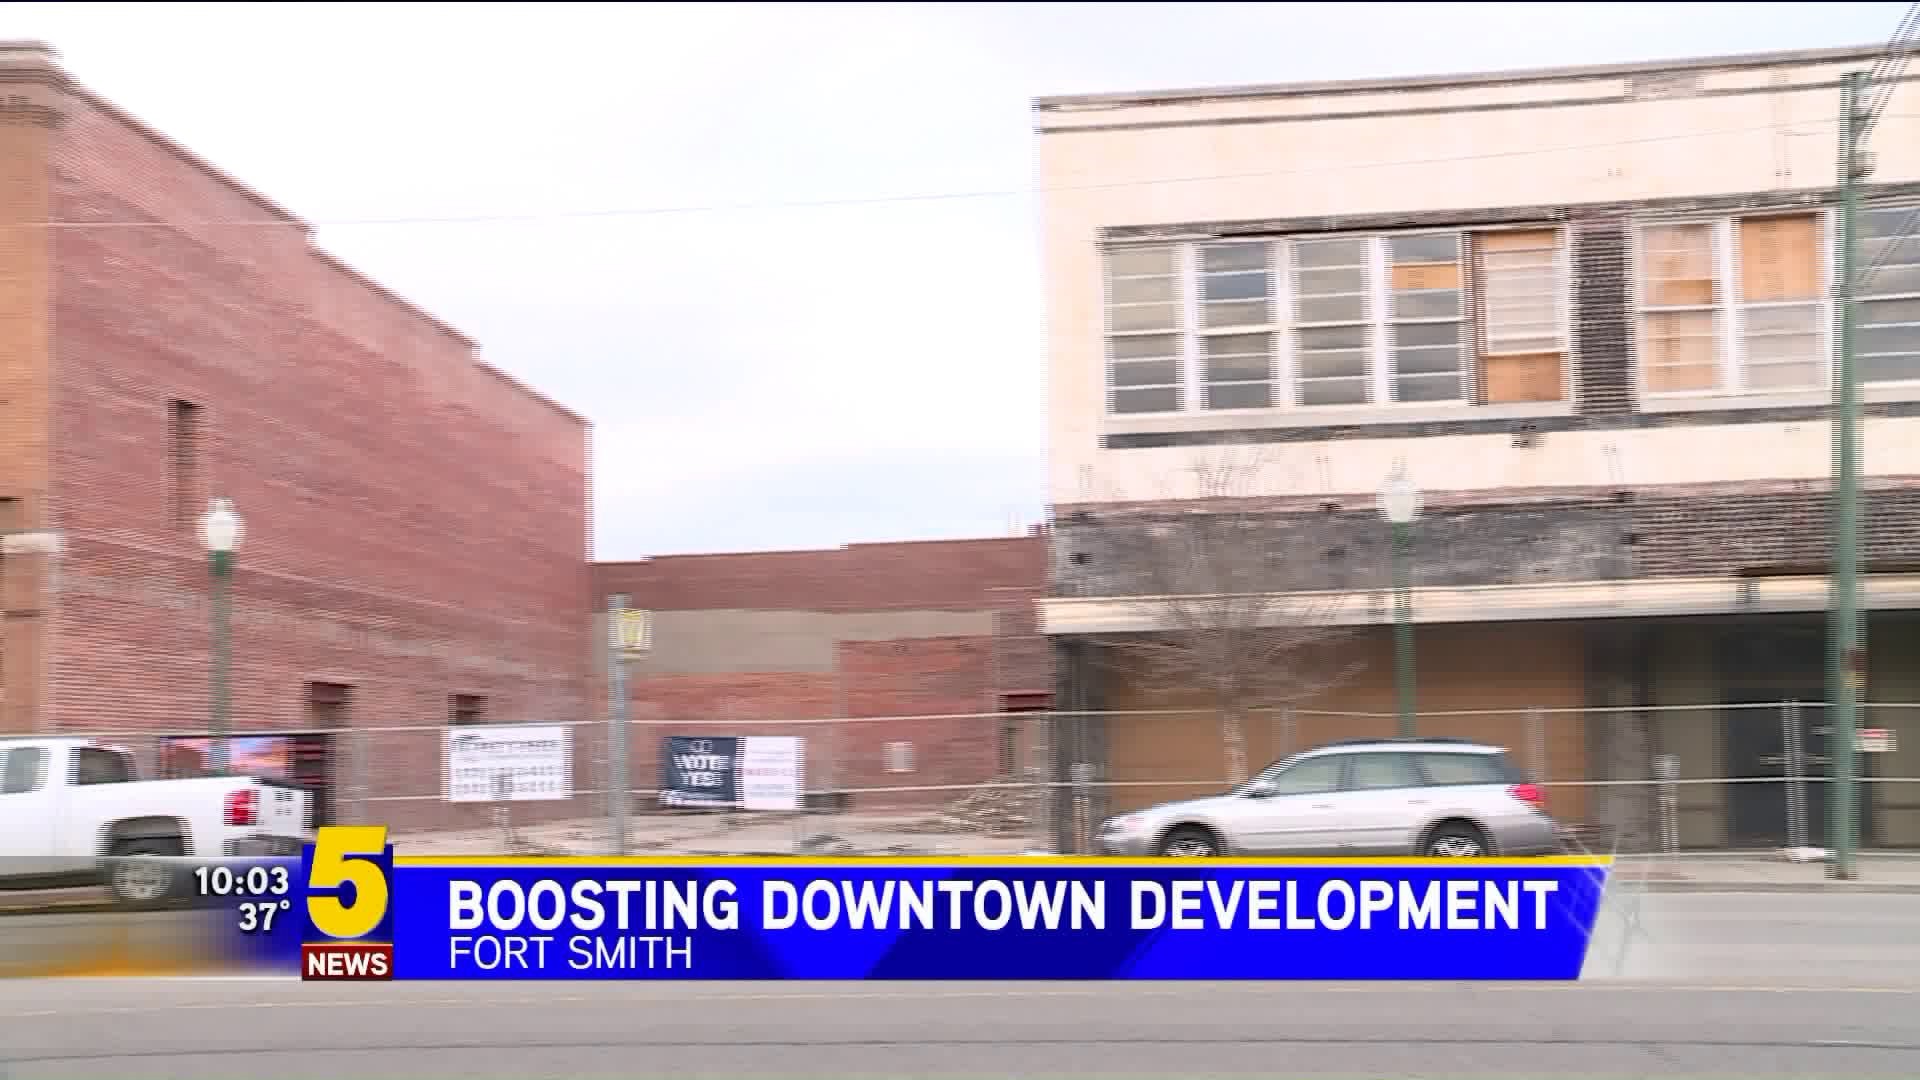 Boosting Downtown Development in Fort Smith